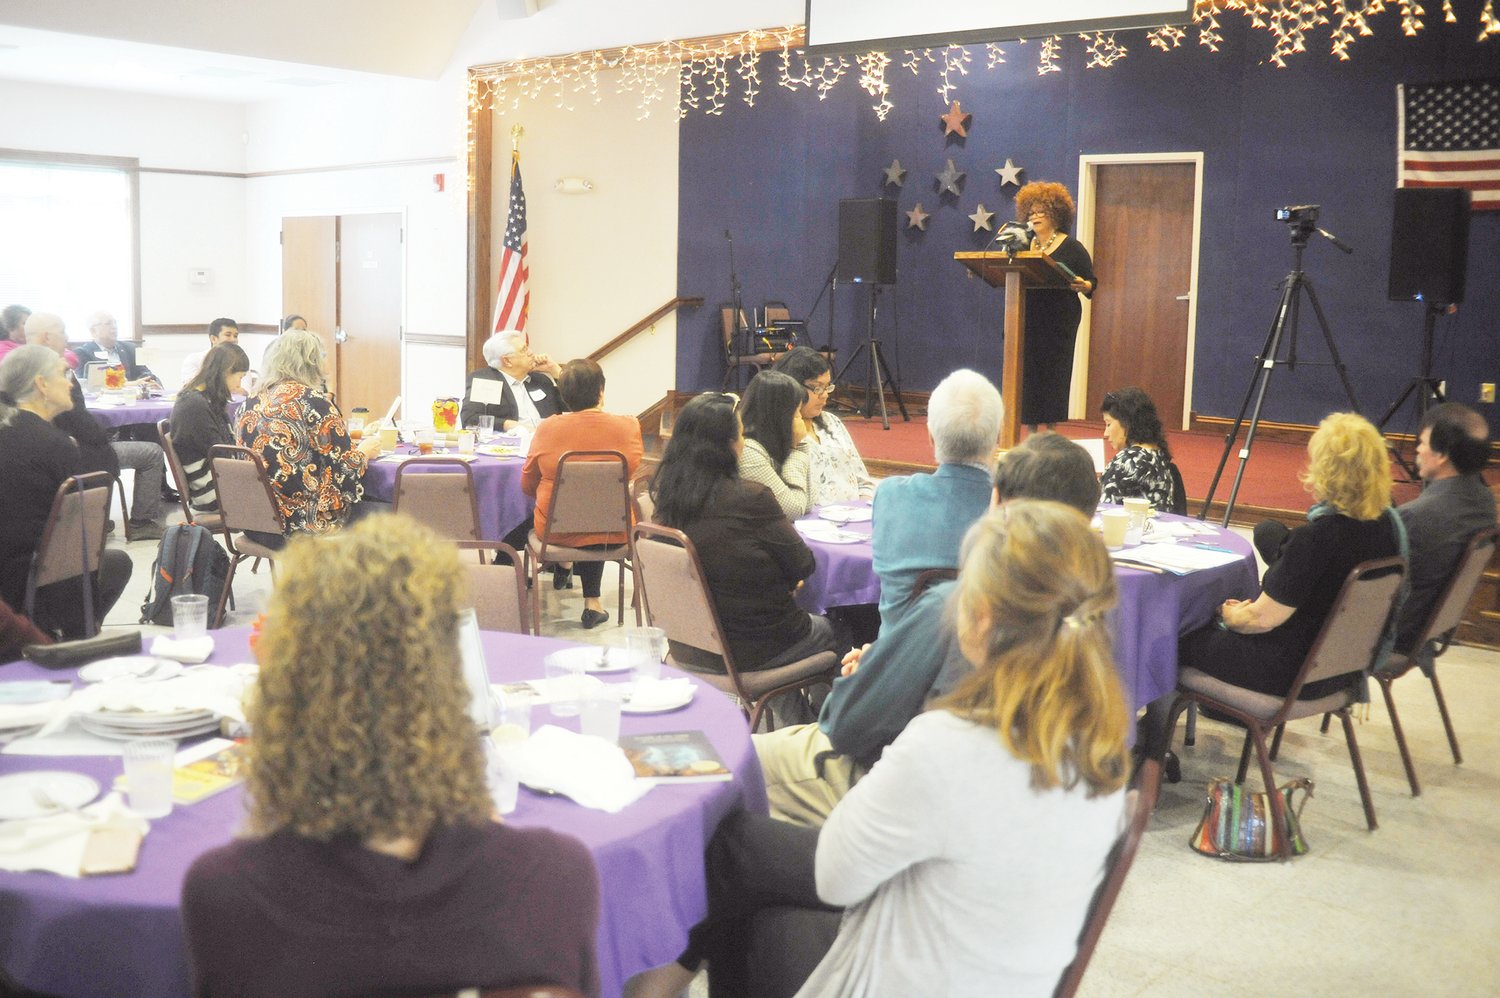 Jaki Shelton Green, N.C.'s poet laureate, spoke at Saturday's Chatham Literacy Council fall luncheon at the Western Chatham Senior Center in Siler City. She took the listeners on a journey to the time of her grandmother’s grandmother, in times of slavery and oppression, and the rusty nails that are a story of freedom in her family. Her message to others is that ‘there is power locked in stories, that is life-changing. Unleash the power of story-telling.’